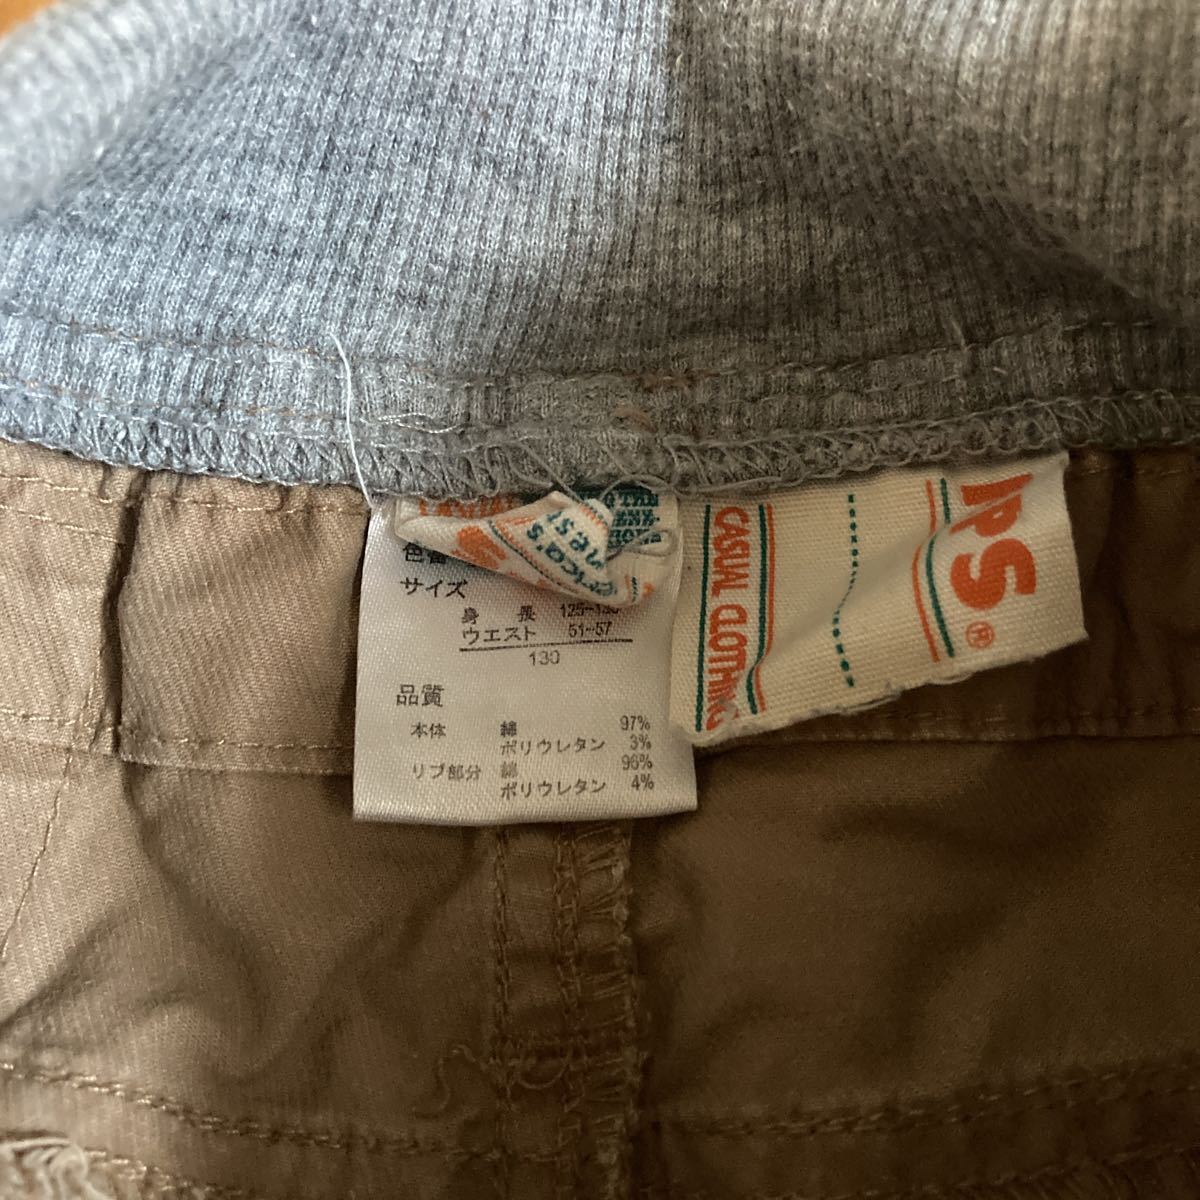 used prompt decision free shipping!MPS Right on pants trousers long trousers 130 size cotton 97% polyurethane 3%